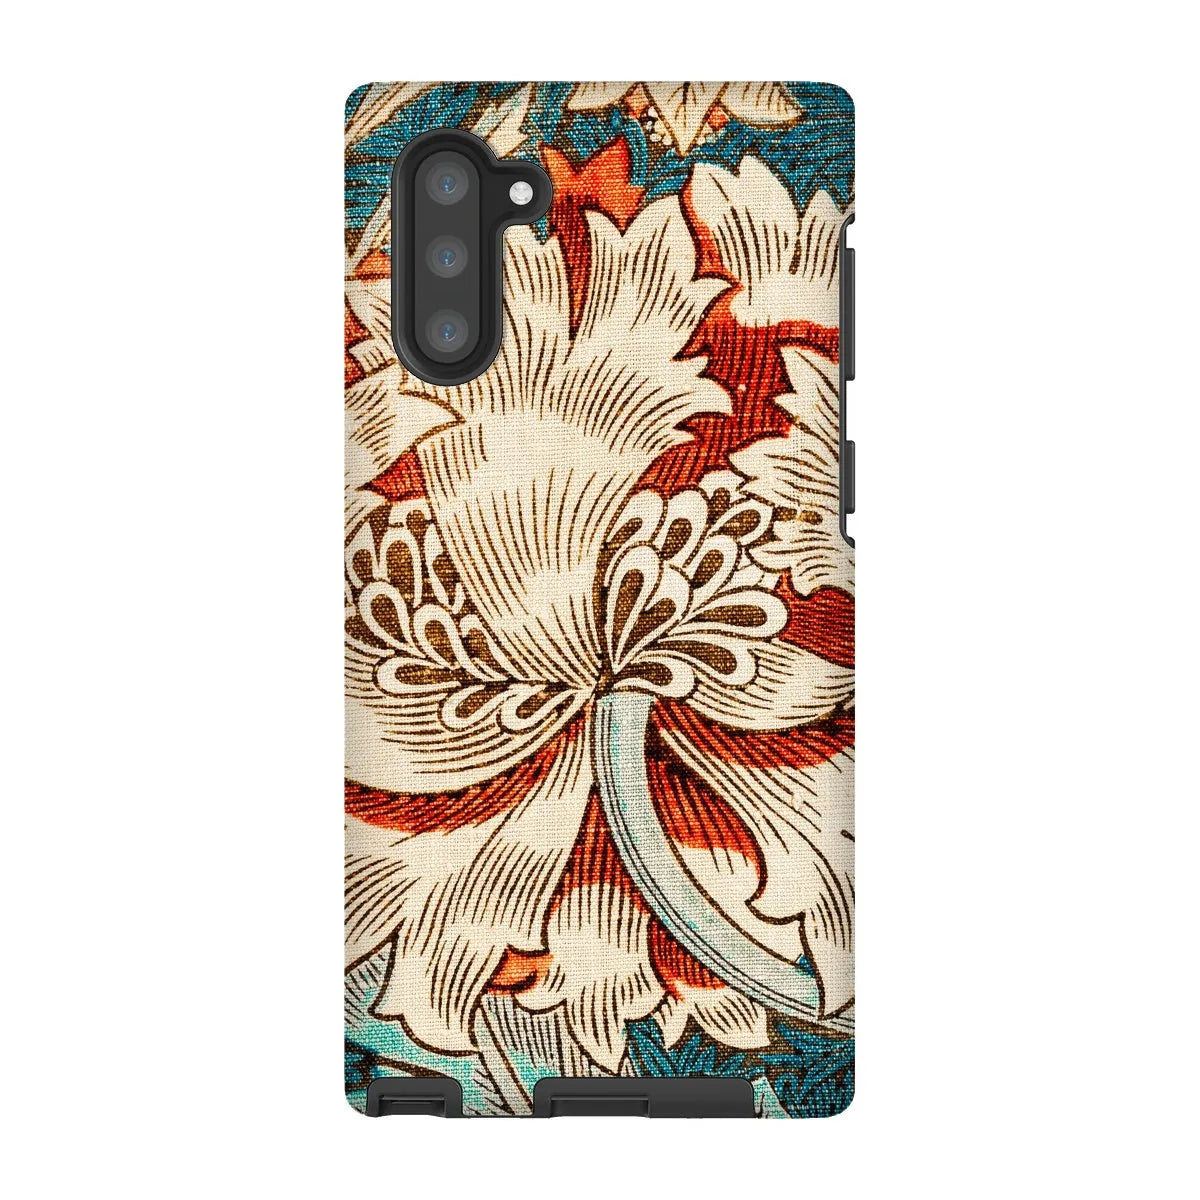 Honeysuckle Too By William Morris Phone Case - Samsung Galaxy Note 10 / Matte - Mobile Phone Cases - Aesthetic Art